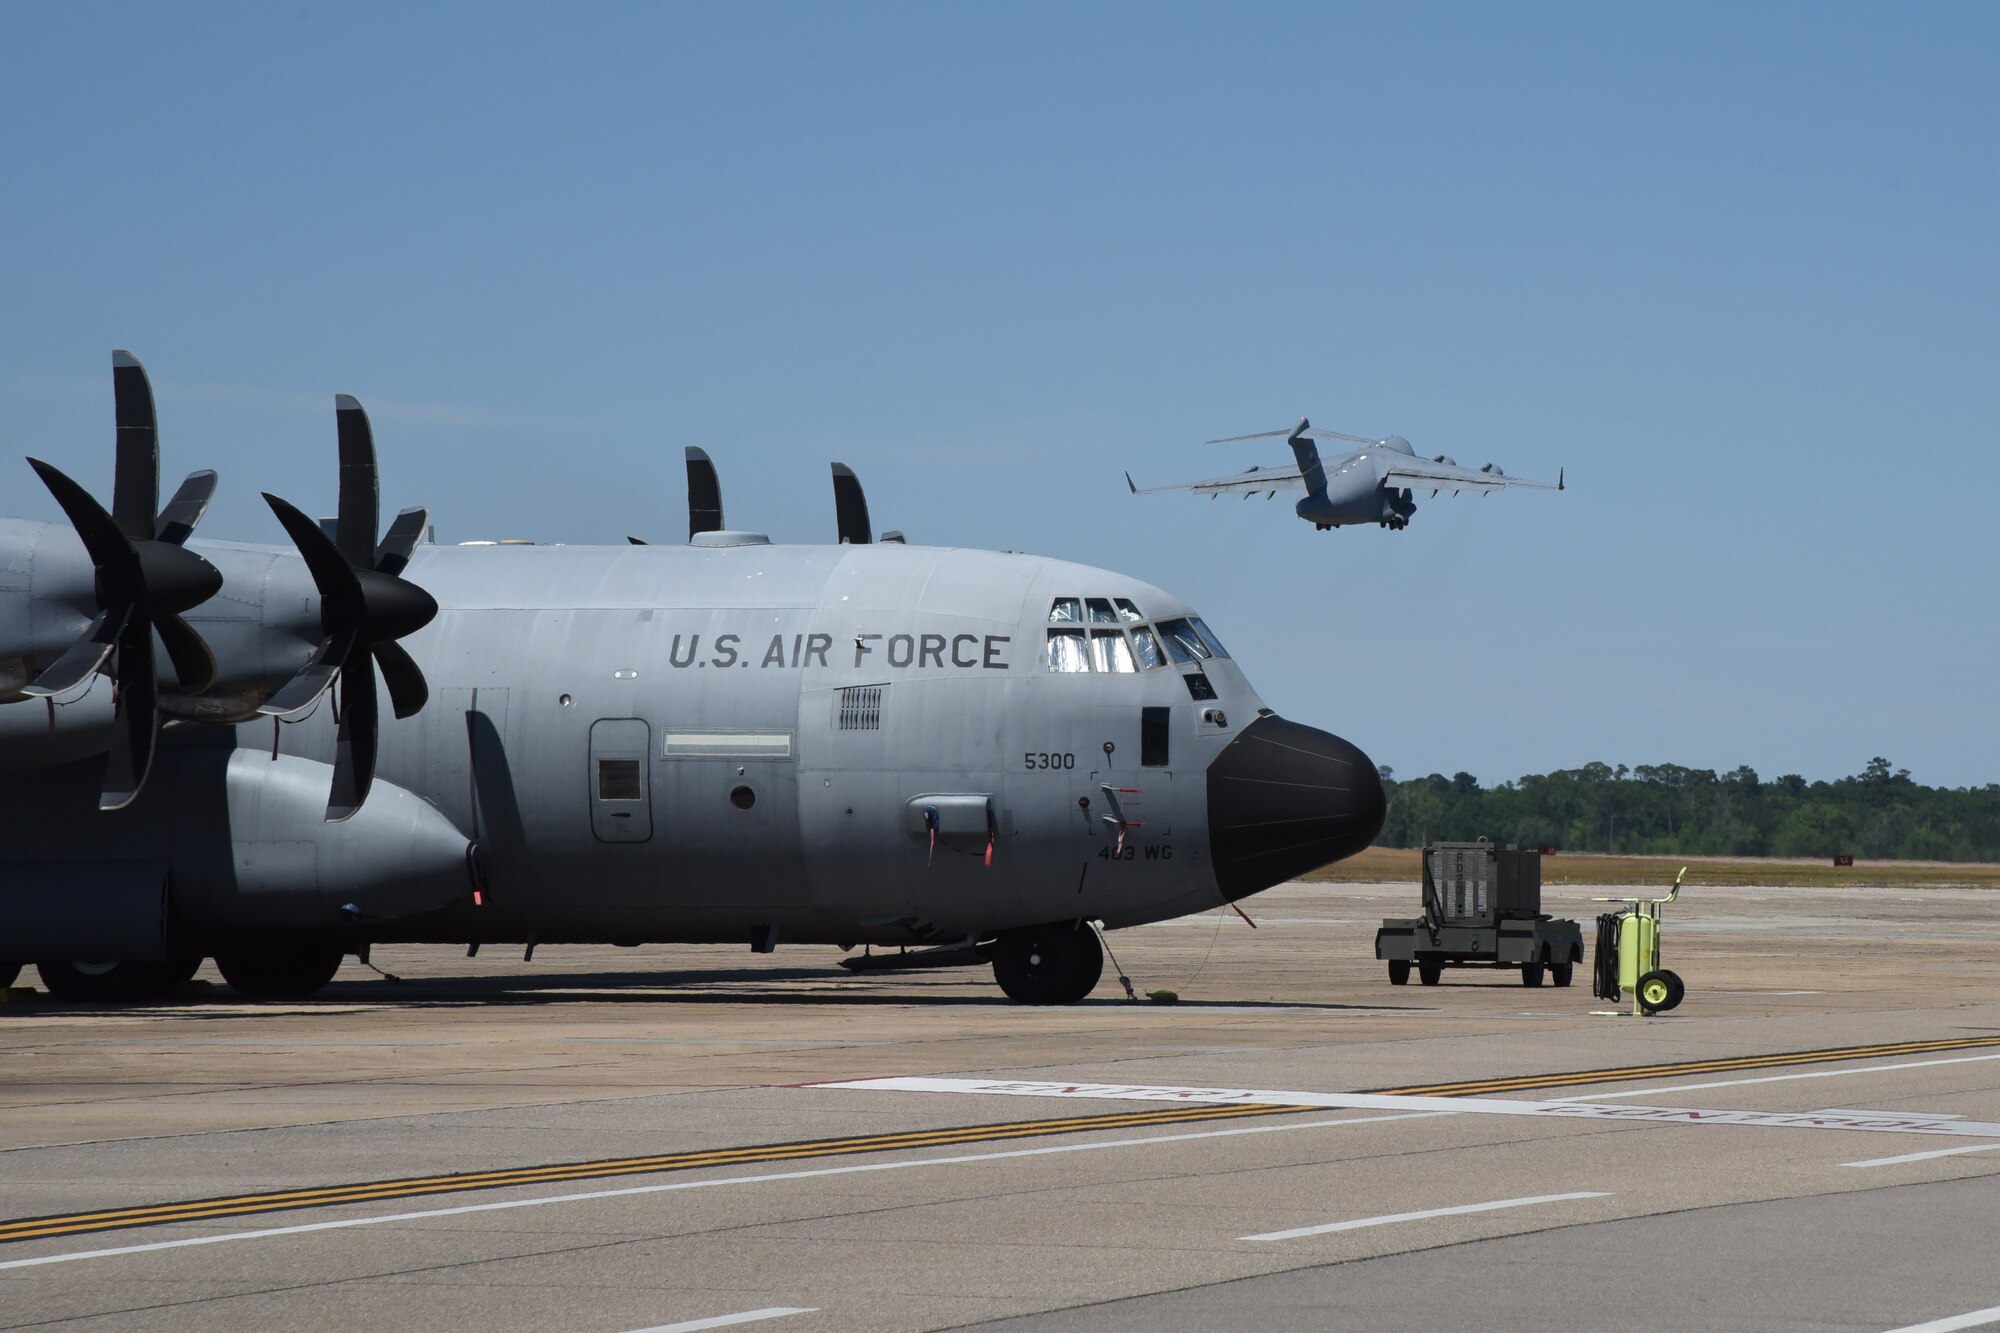 A C-17 Globemaster III flown by the 89th Airlift Squadron, based out of Wright-Patterson Air Force Base, Ohio, departs Keesler AFB, Miss., April 15, 2020. Approximately 10 Airmen with the 403rd Wing's 36th Aeromedical Evacuation Squadron mobilized to support COVID-19 relief efforts. These reservists will provide life-saving in-flight patient care. (U.S. Air Force photo by Lt. Col. Marnee A.C. Losurdo)